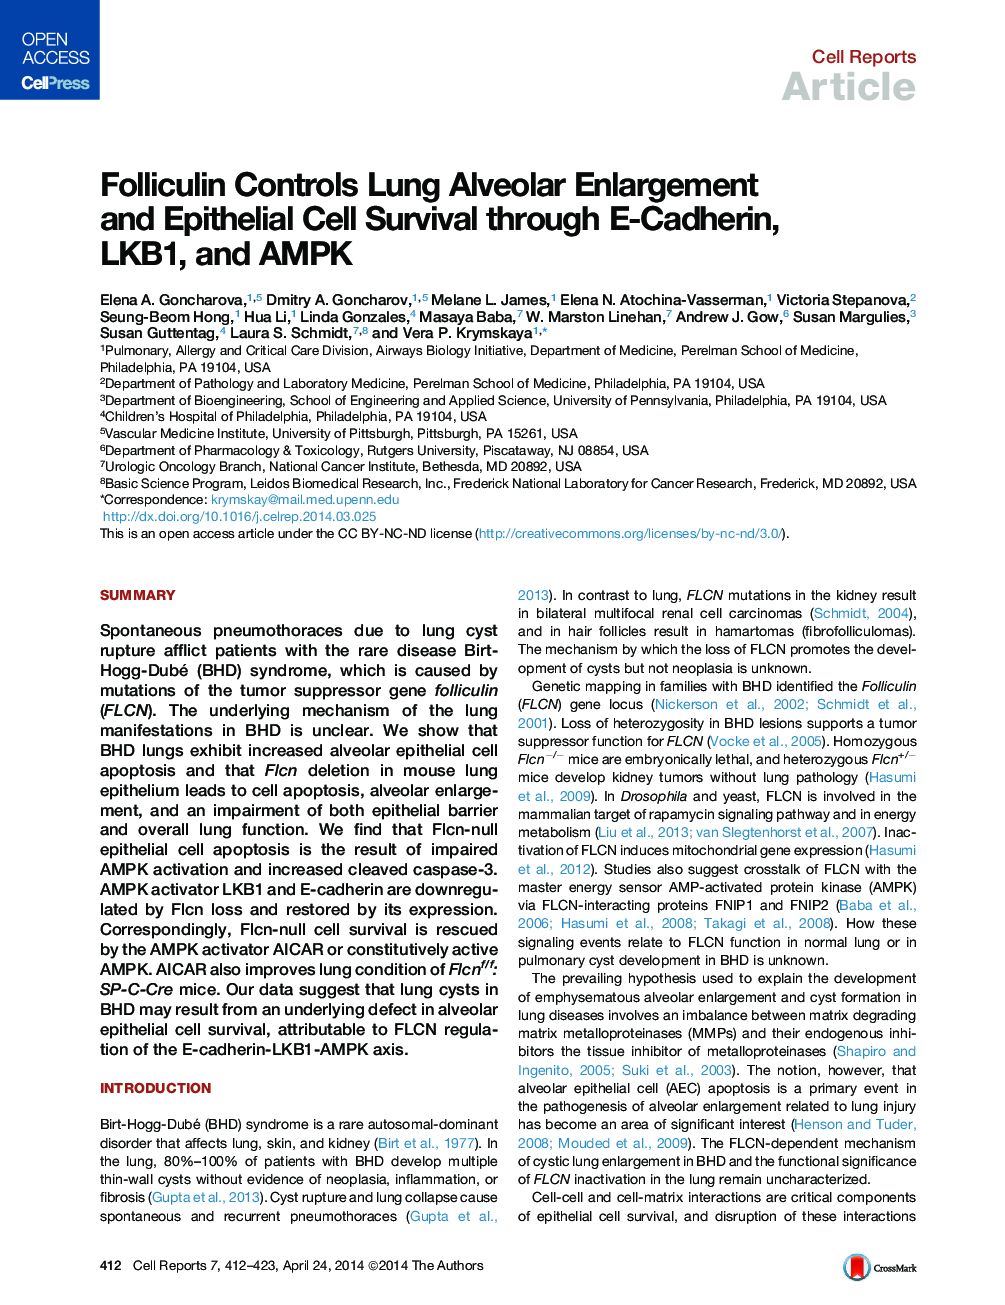 Folliculin Controls Lung Alveolar Enlargement and Epithelial Cell Survival through E-Cadherin, LKB1, and AMPK 